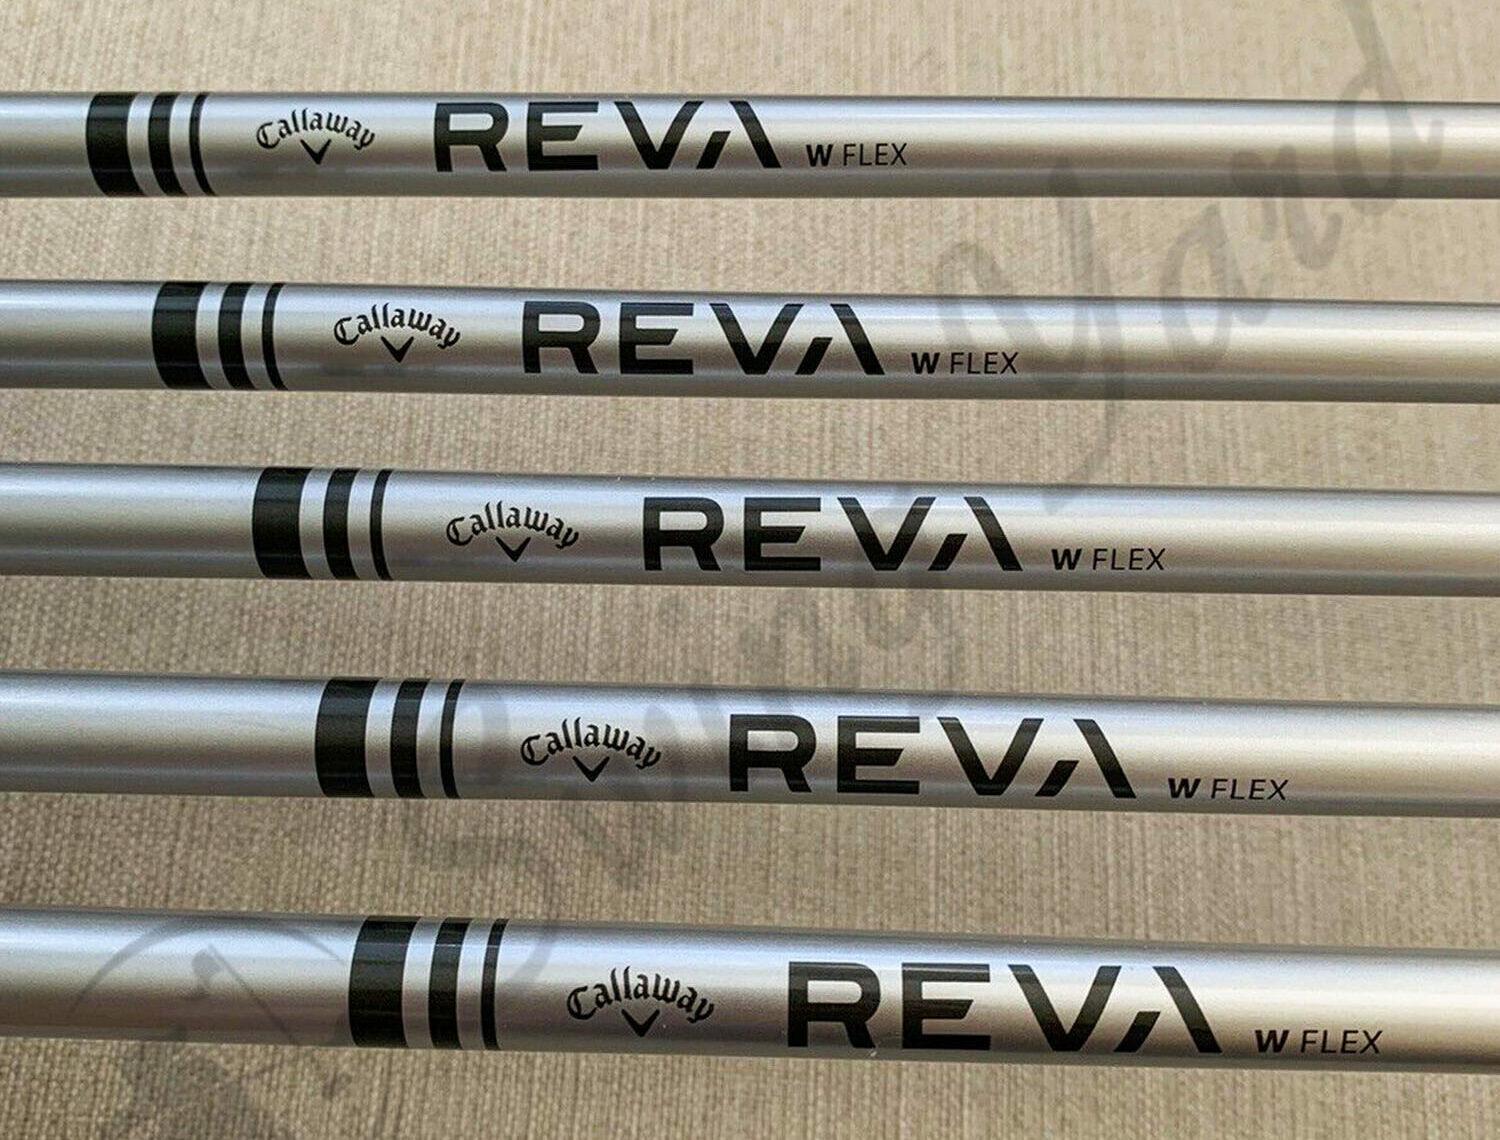 My new Callaway Reva shafts for testing